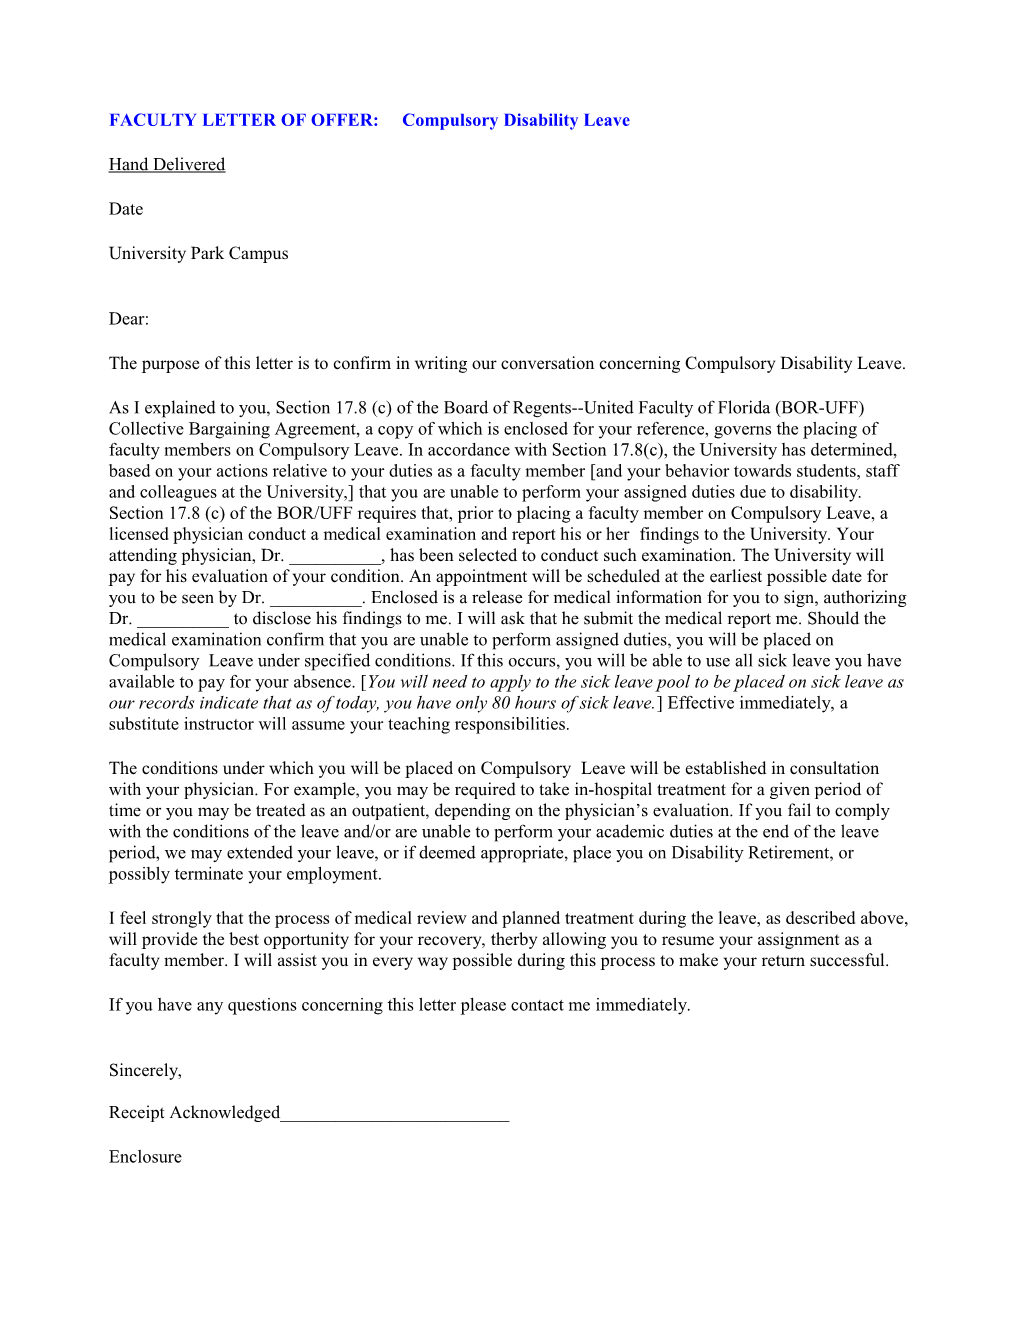 FACULTY LETTER of OFFER: Administrative